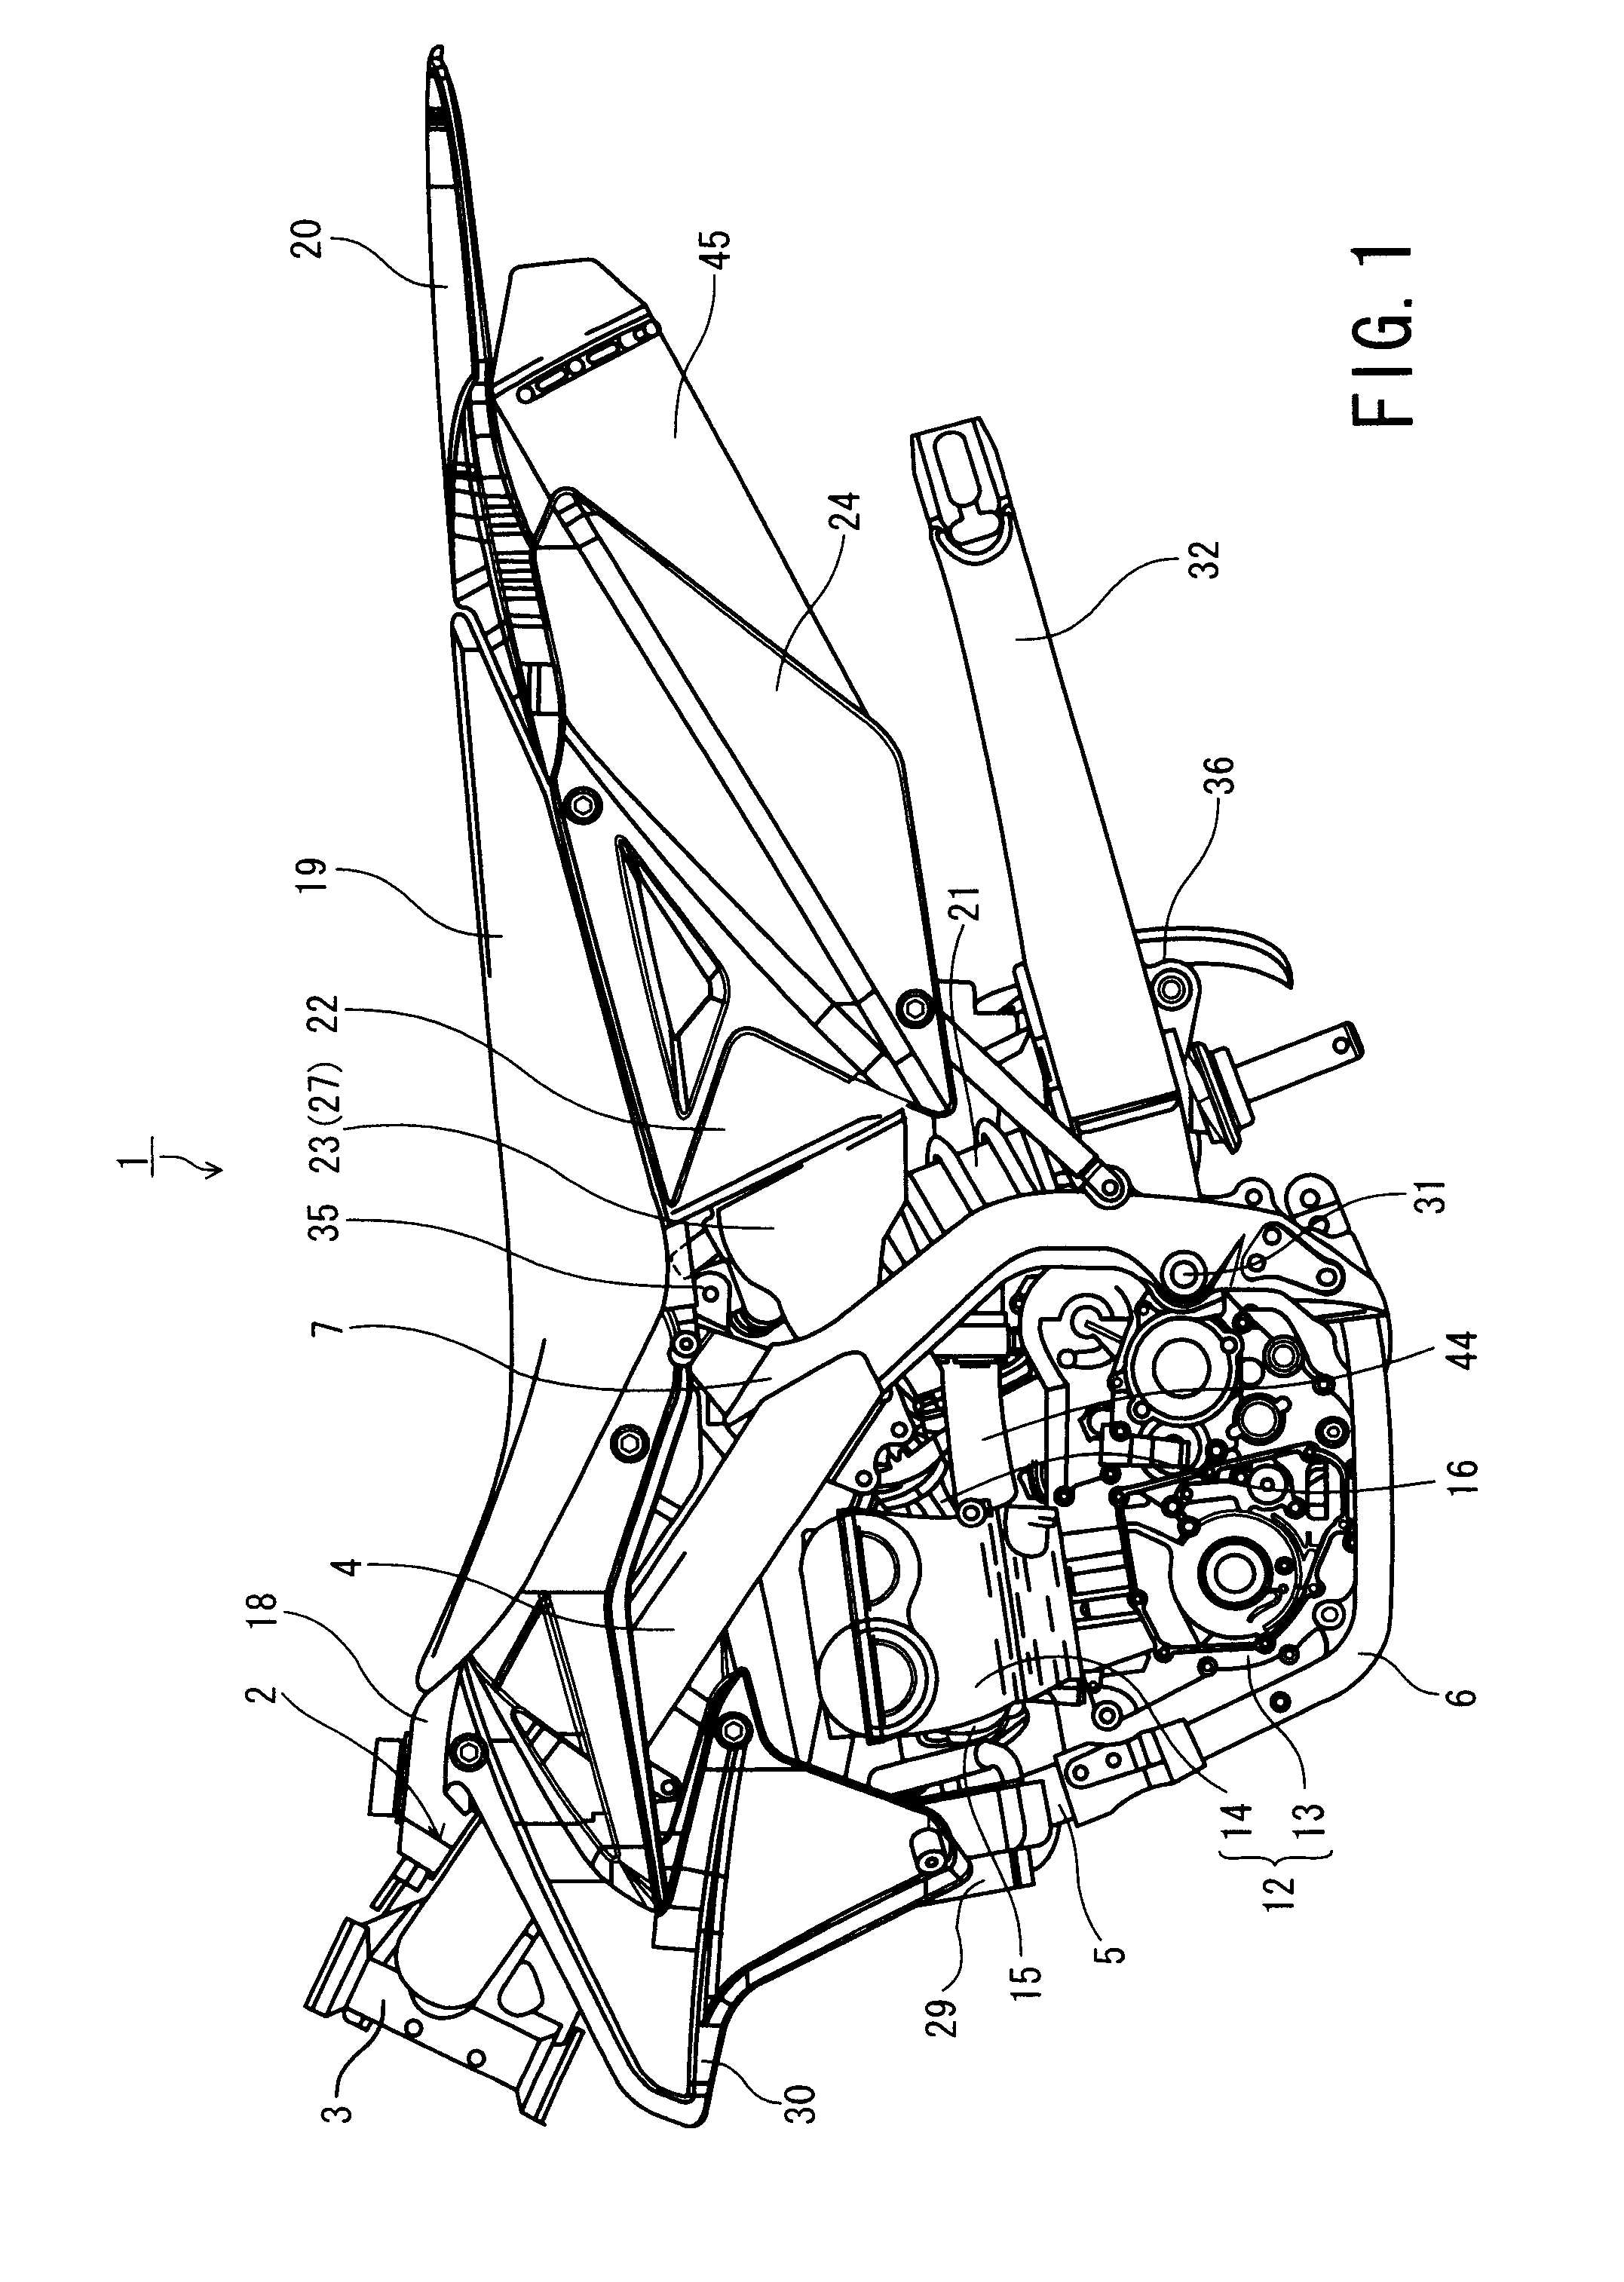 Intake device for motorcycle